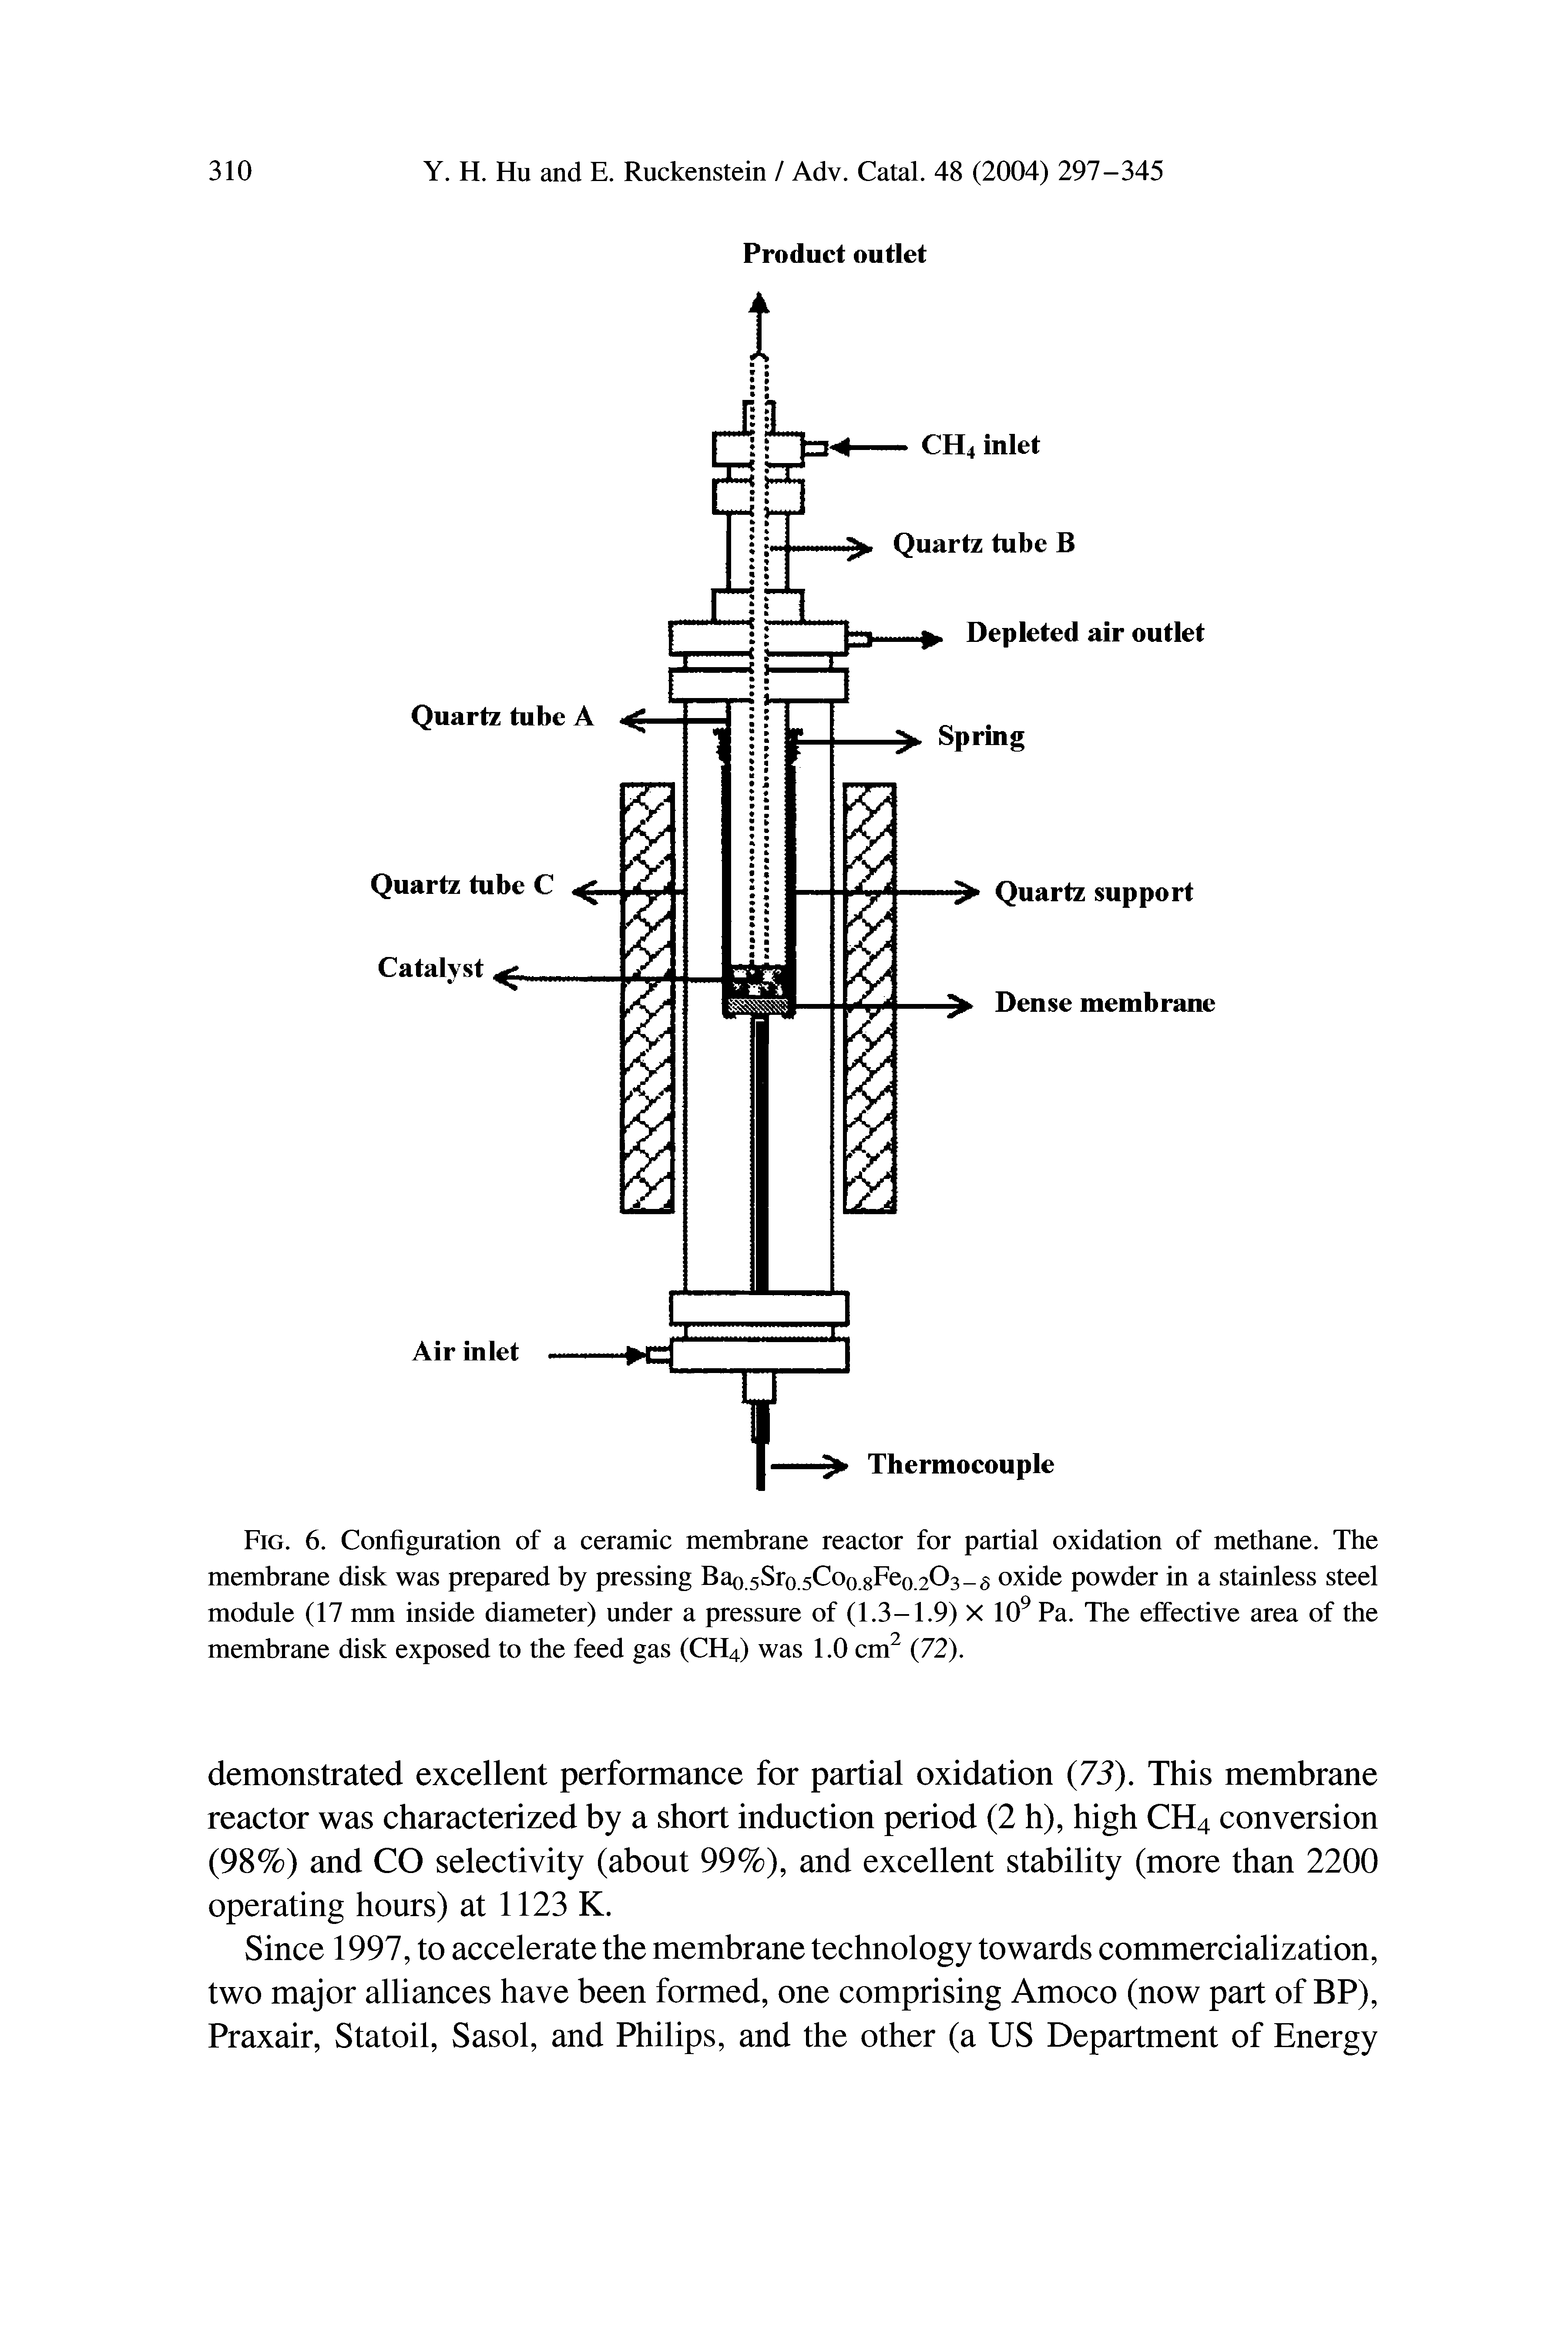 Fig. 6. Configuration of a ceramic membrane reactor for partial oxidation of methane. The membrane disk was prepared by pressing Bao.5Sro.5Coo.8Feo.2O3-s oxide powder in a stainless steel module (17 mm inside diameter) under a pressure of (1.3-1.9) X 109 Pa. The effective area of the membrane disk exposed to the feed gas (CH4) was 1.0 cm2 (72).